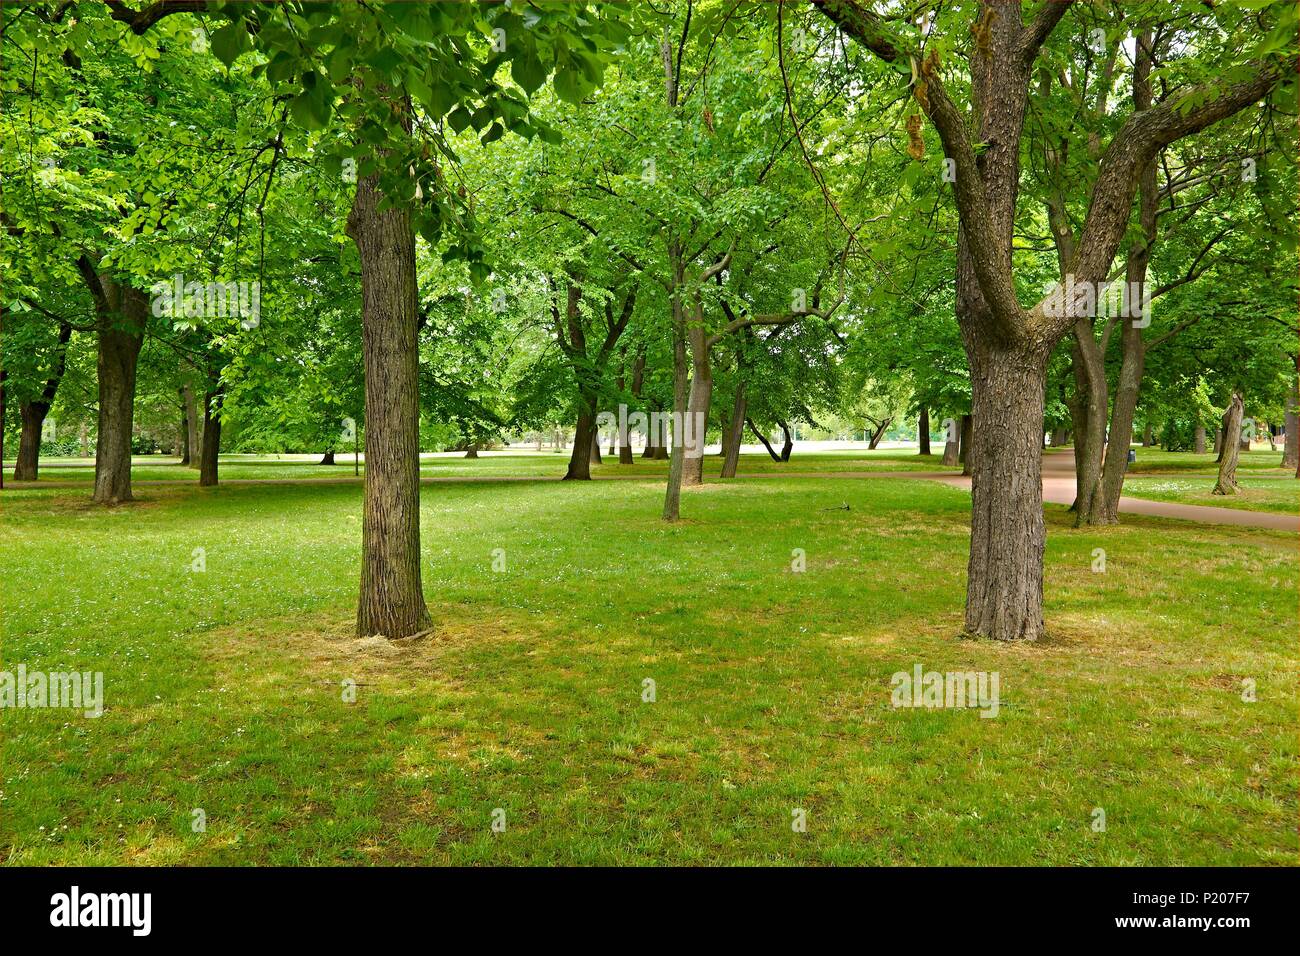 Green trees in a park Stock Photo